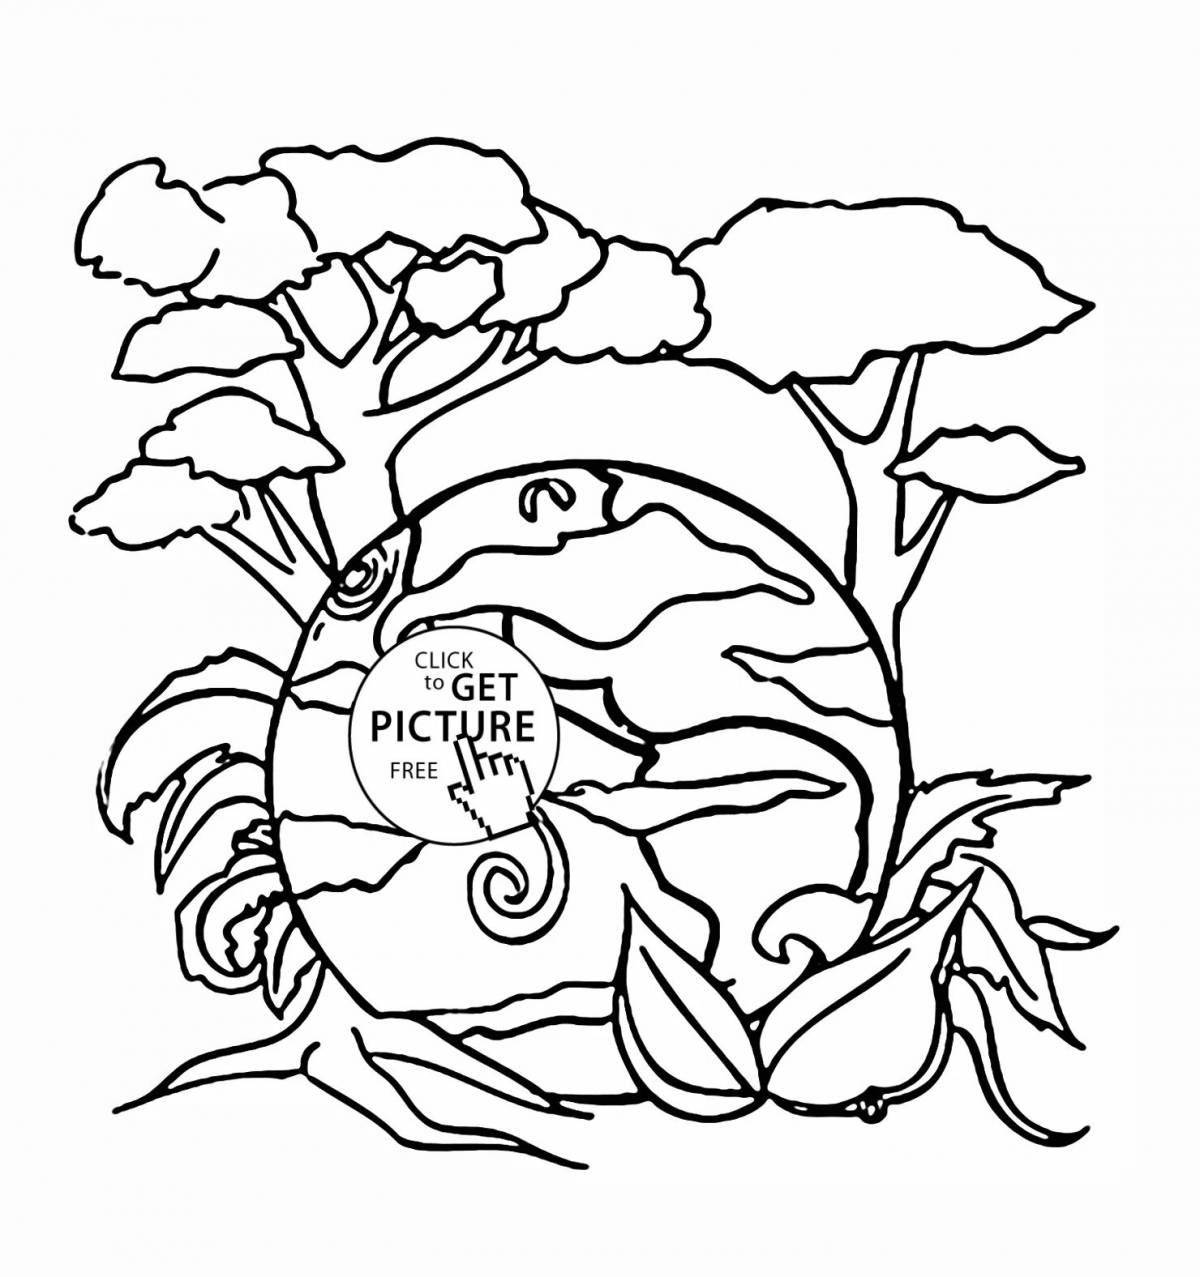 Playful eco coloring book for kids